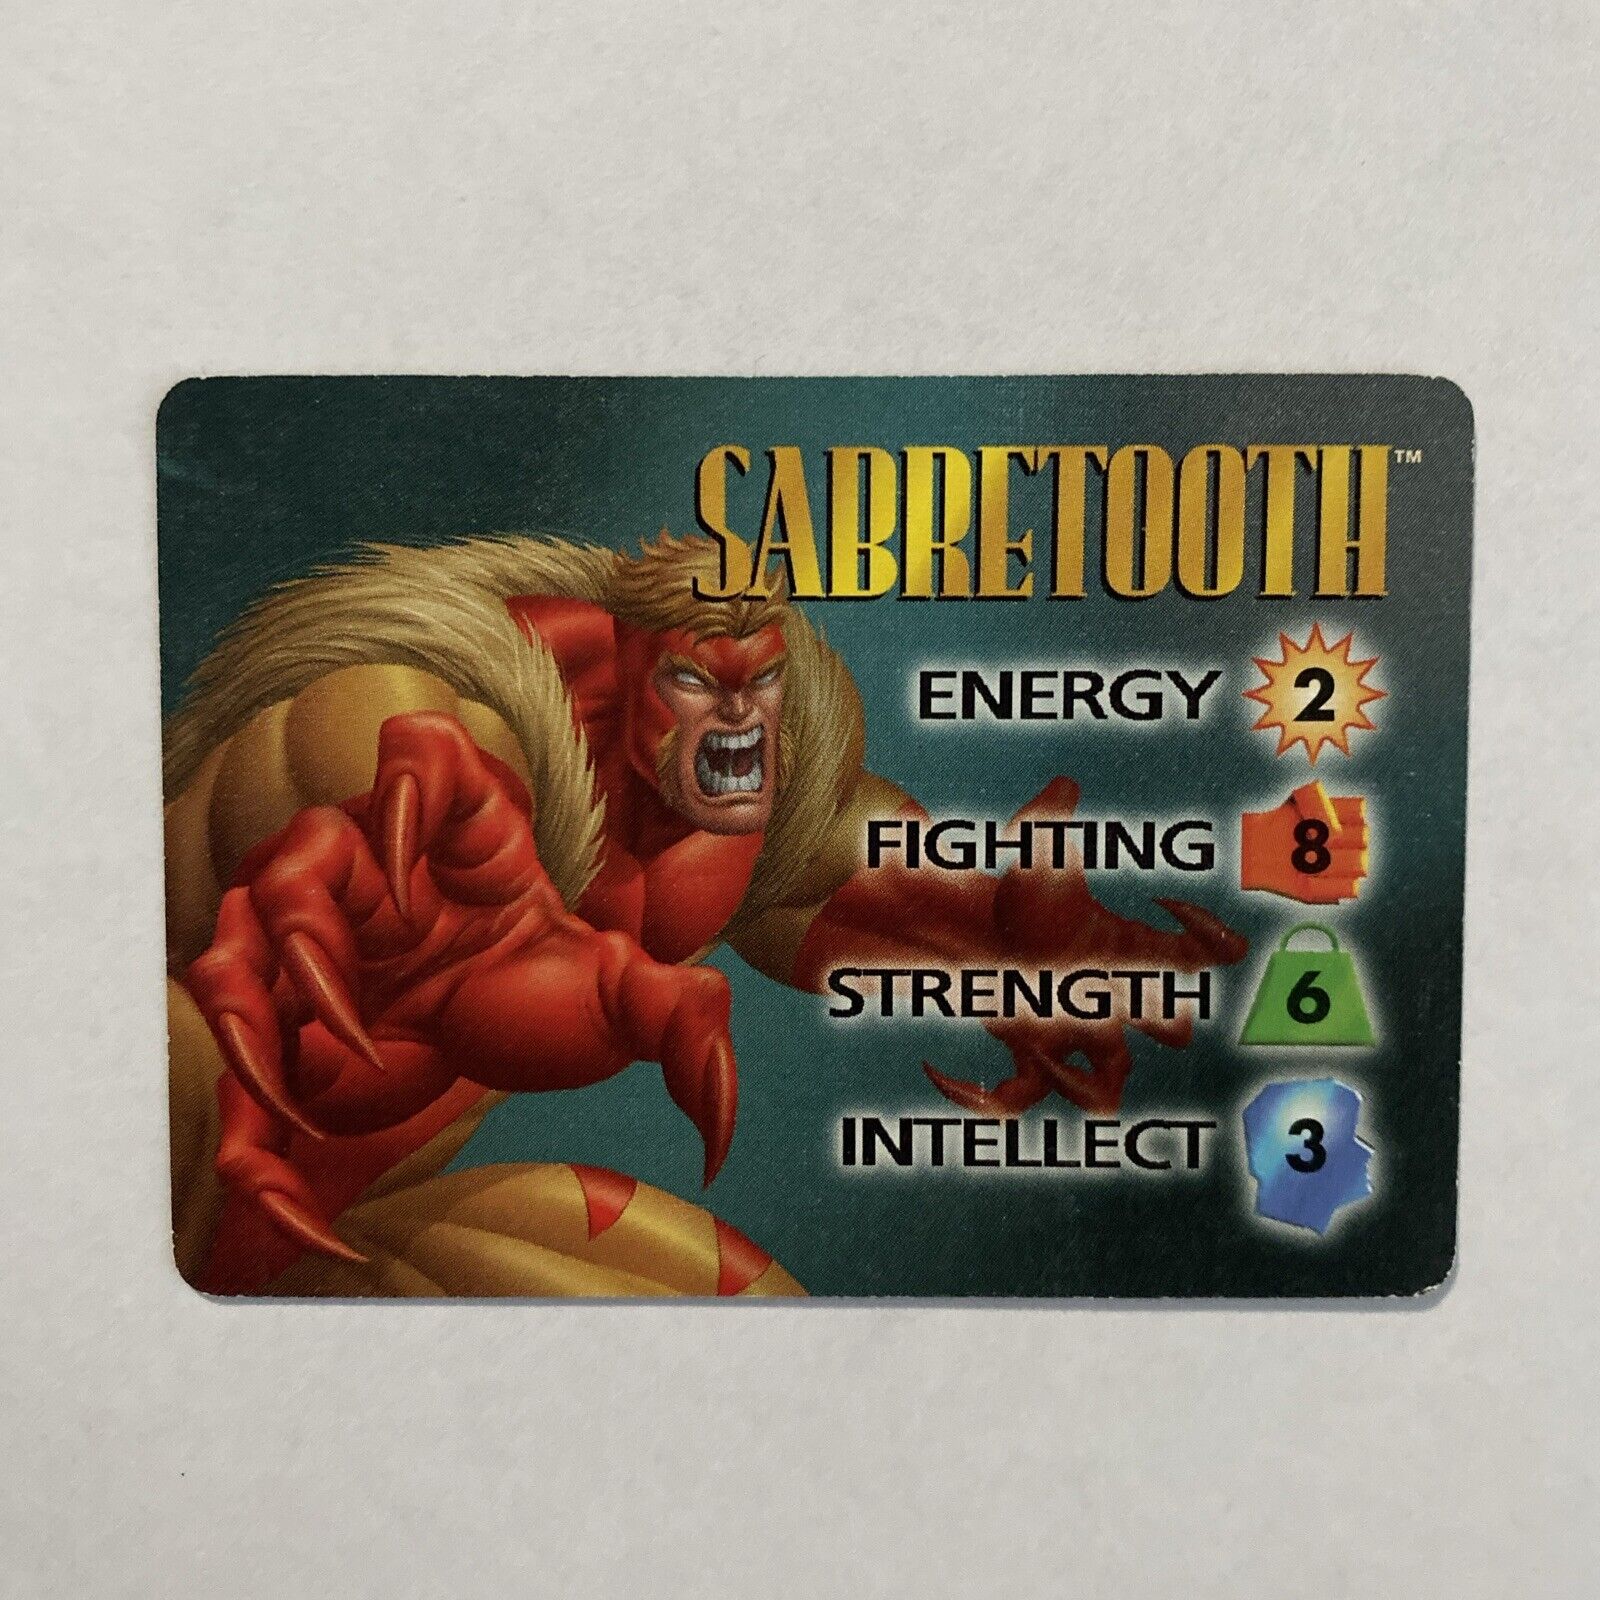 Marvel OVERPOWER Sabretooth IQ character card 